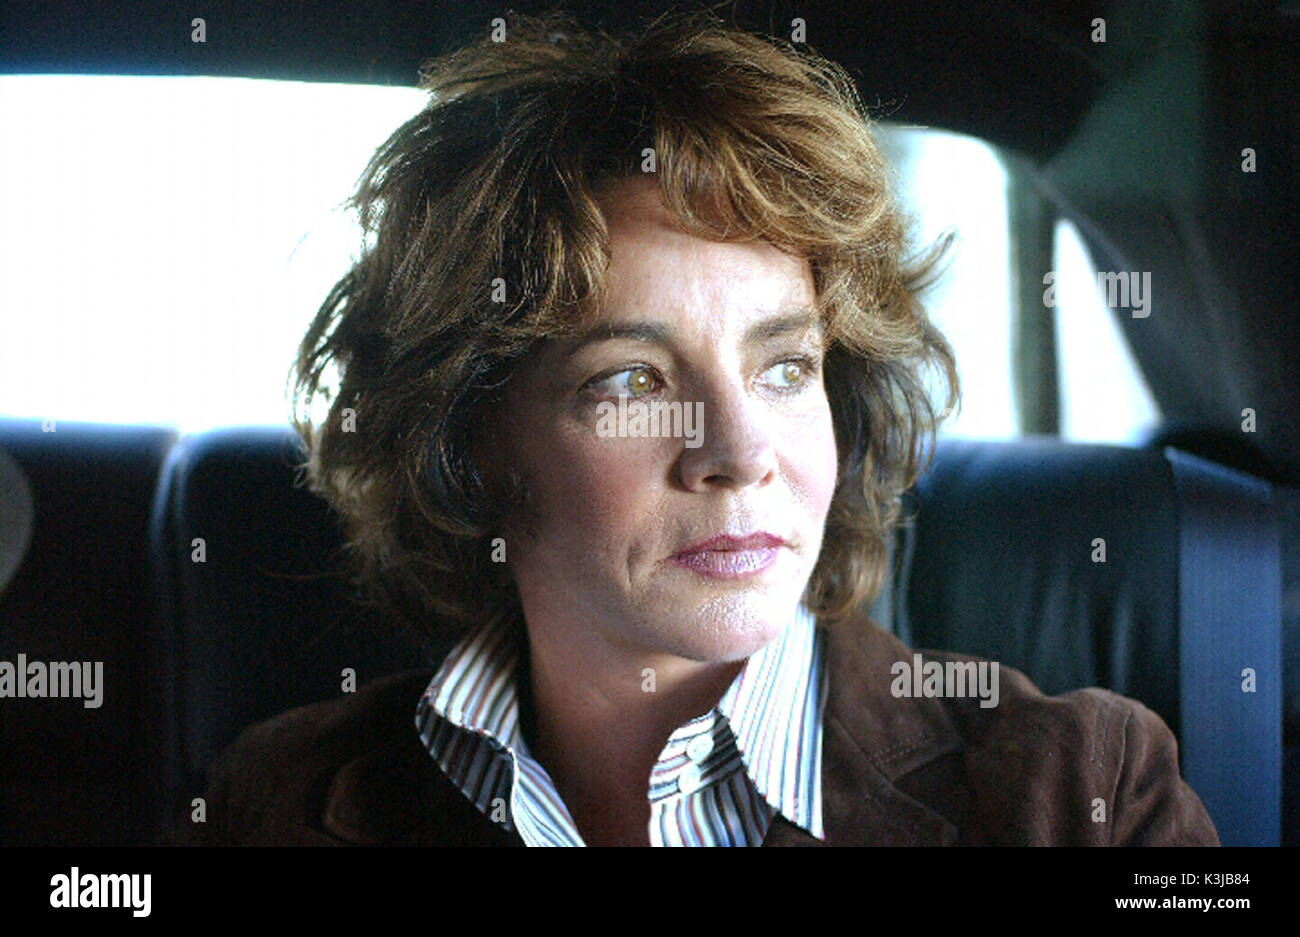 THE WEST WING STOCKARD CHANNING THE WEST WING STOCKARD CHANNING Stock Photo  - Alamy